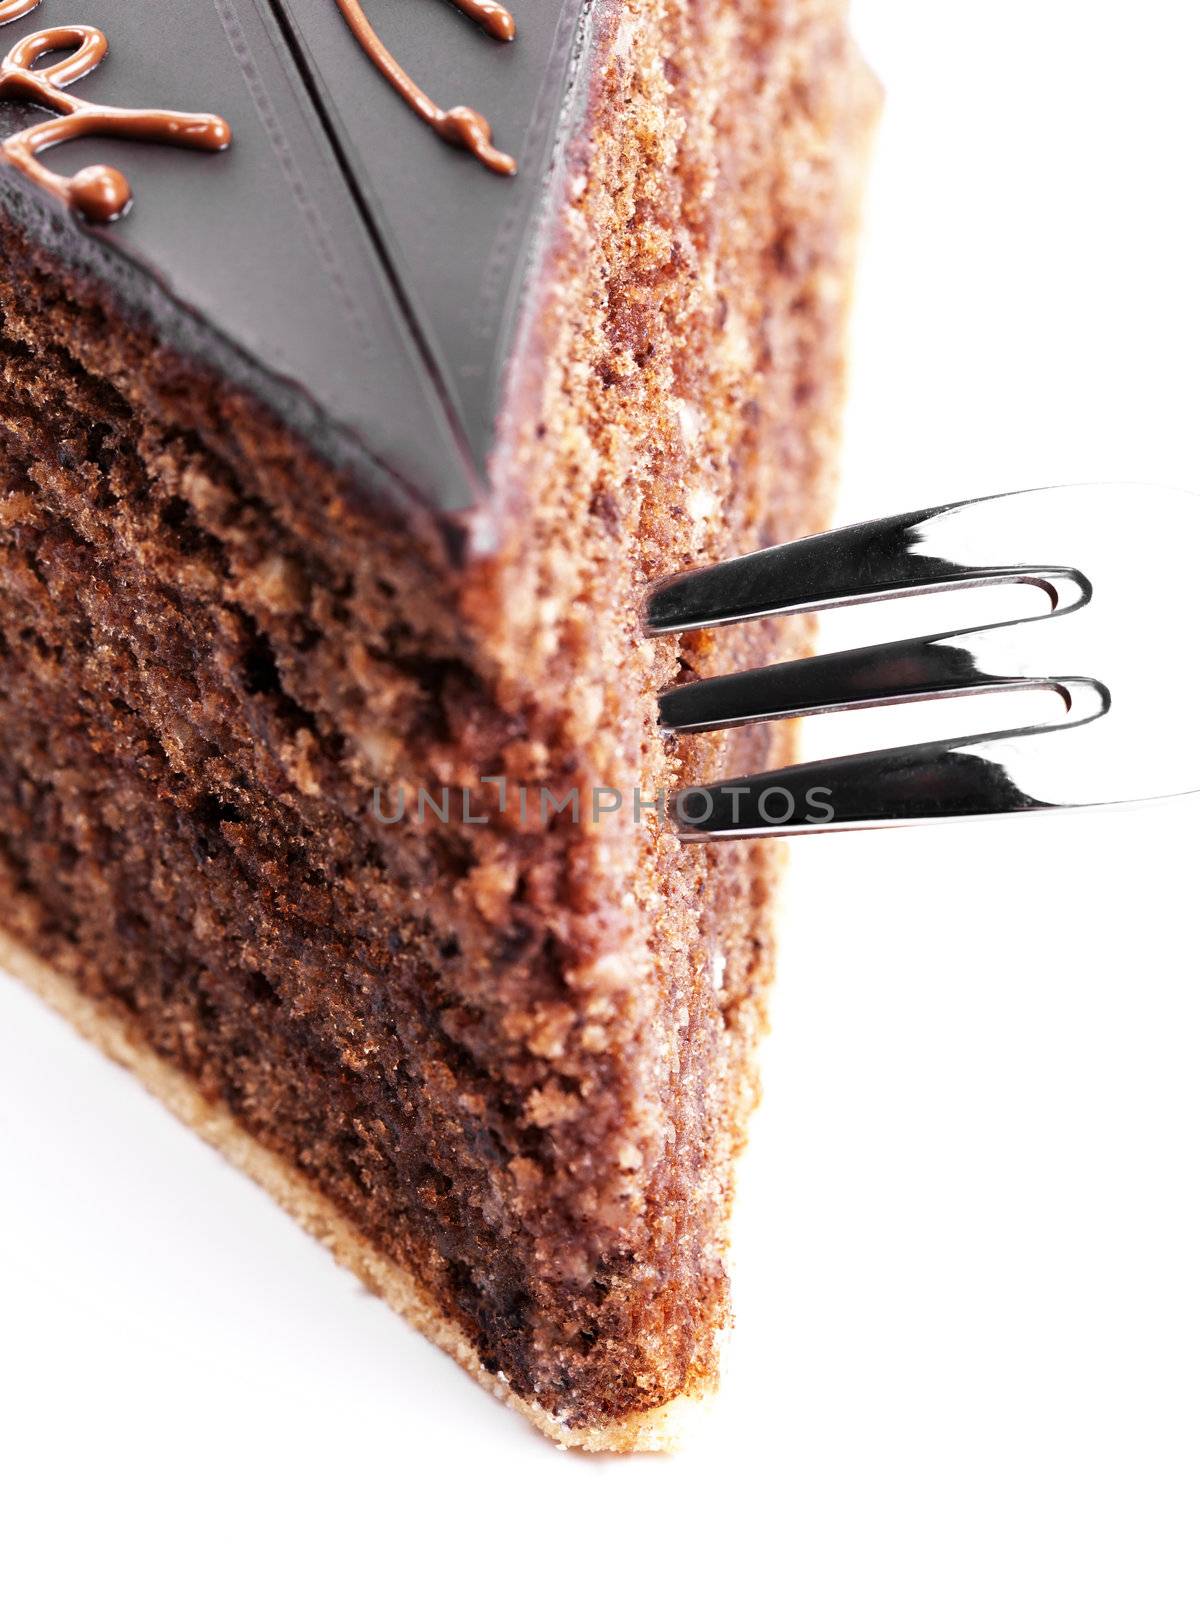 a fork in a chocolate cake by RobStark